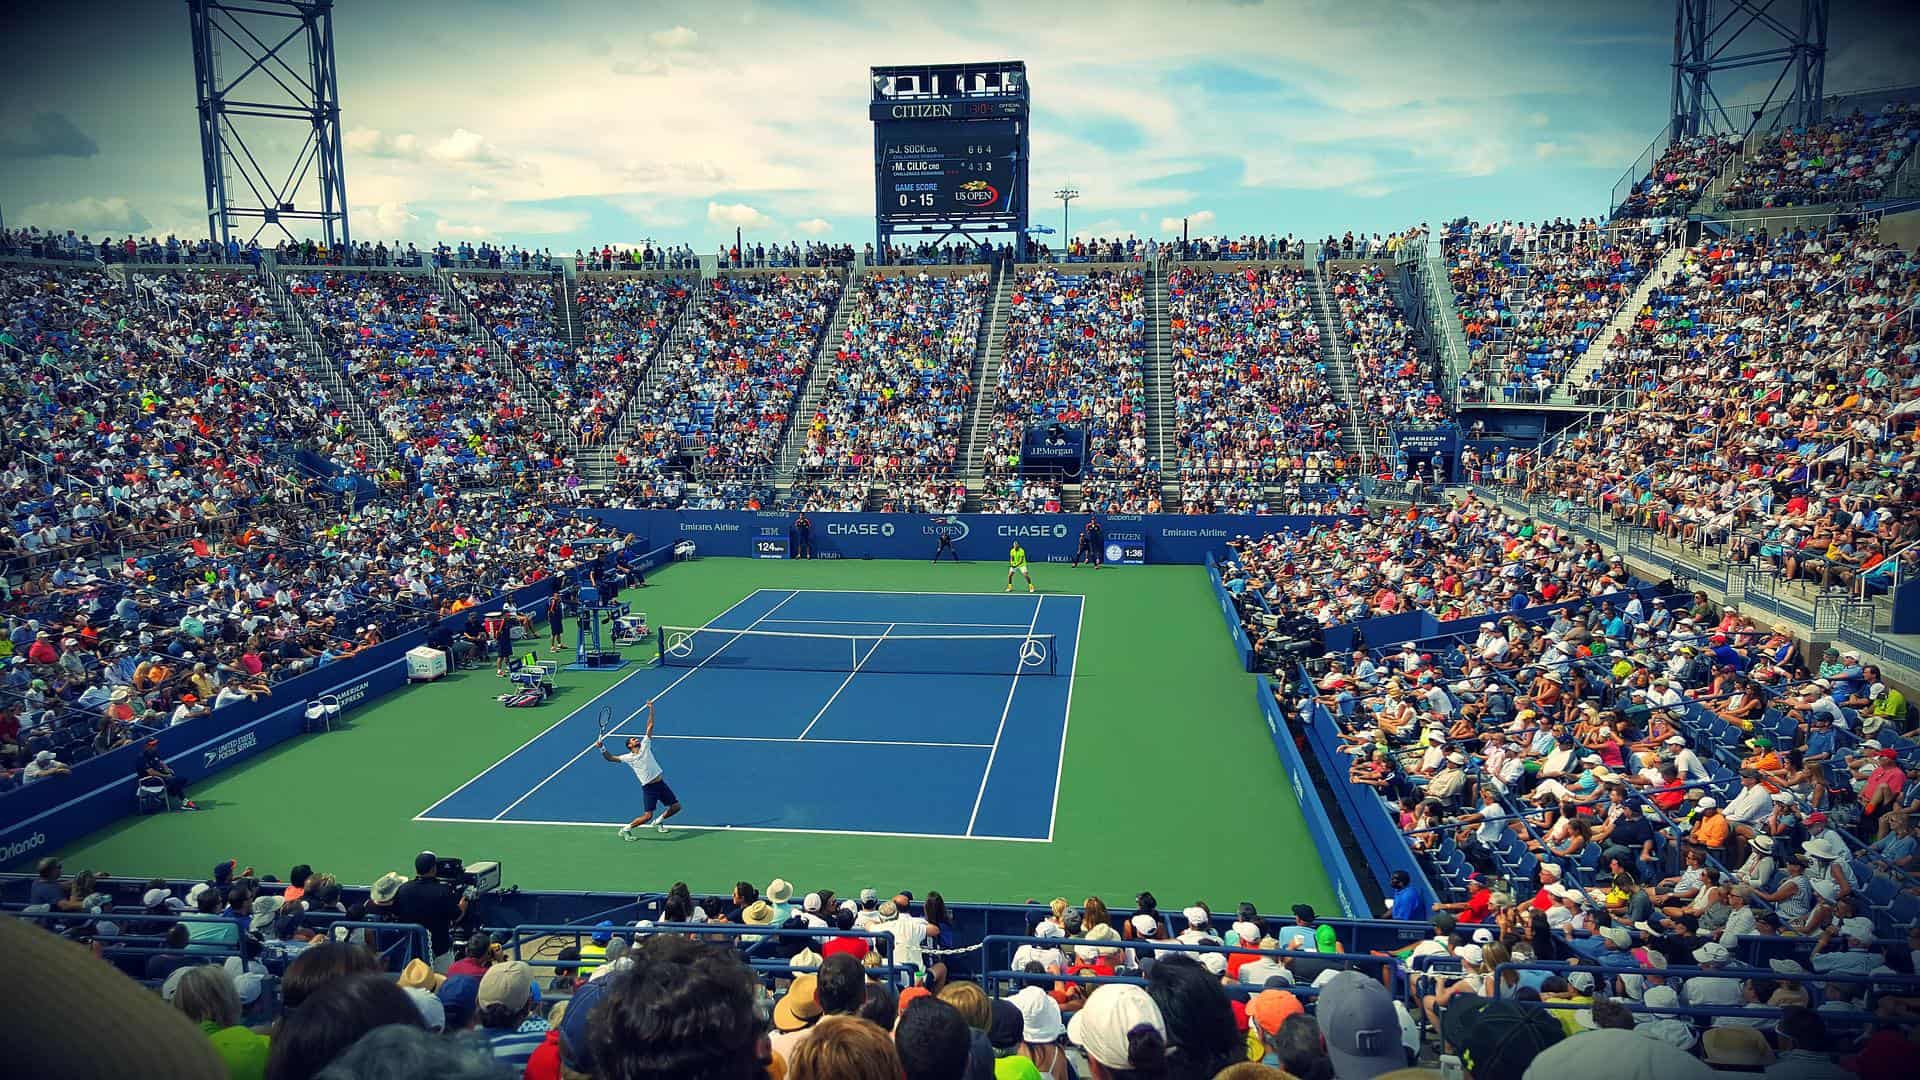 sports hospitality incentive at a tennis tournament | Global agency. BCD Meetings & Events